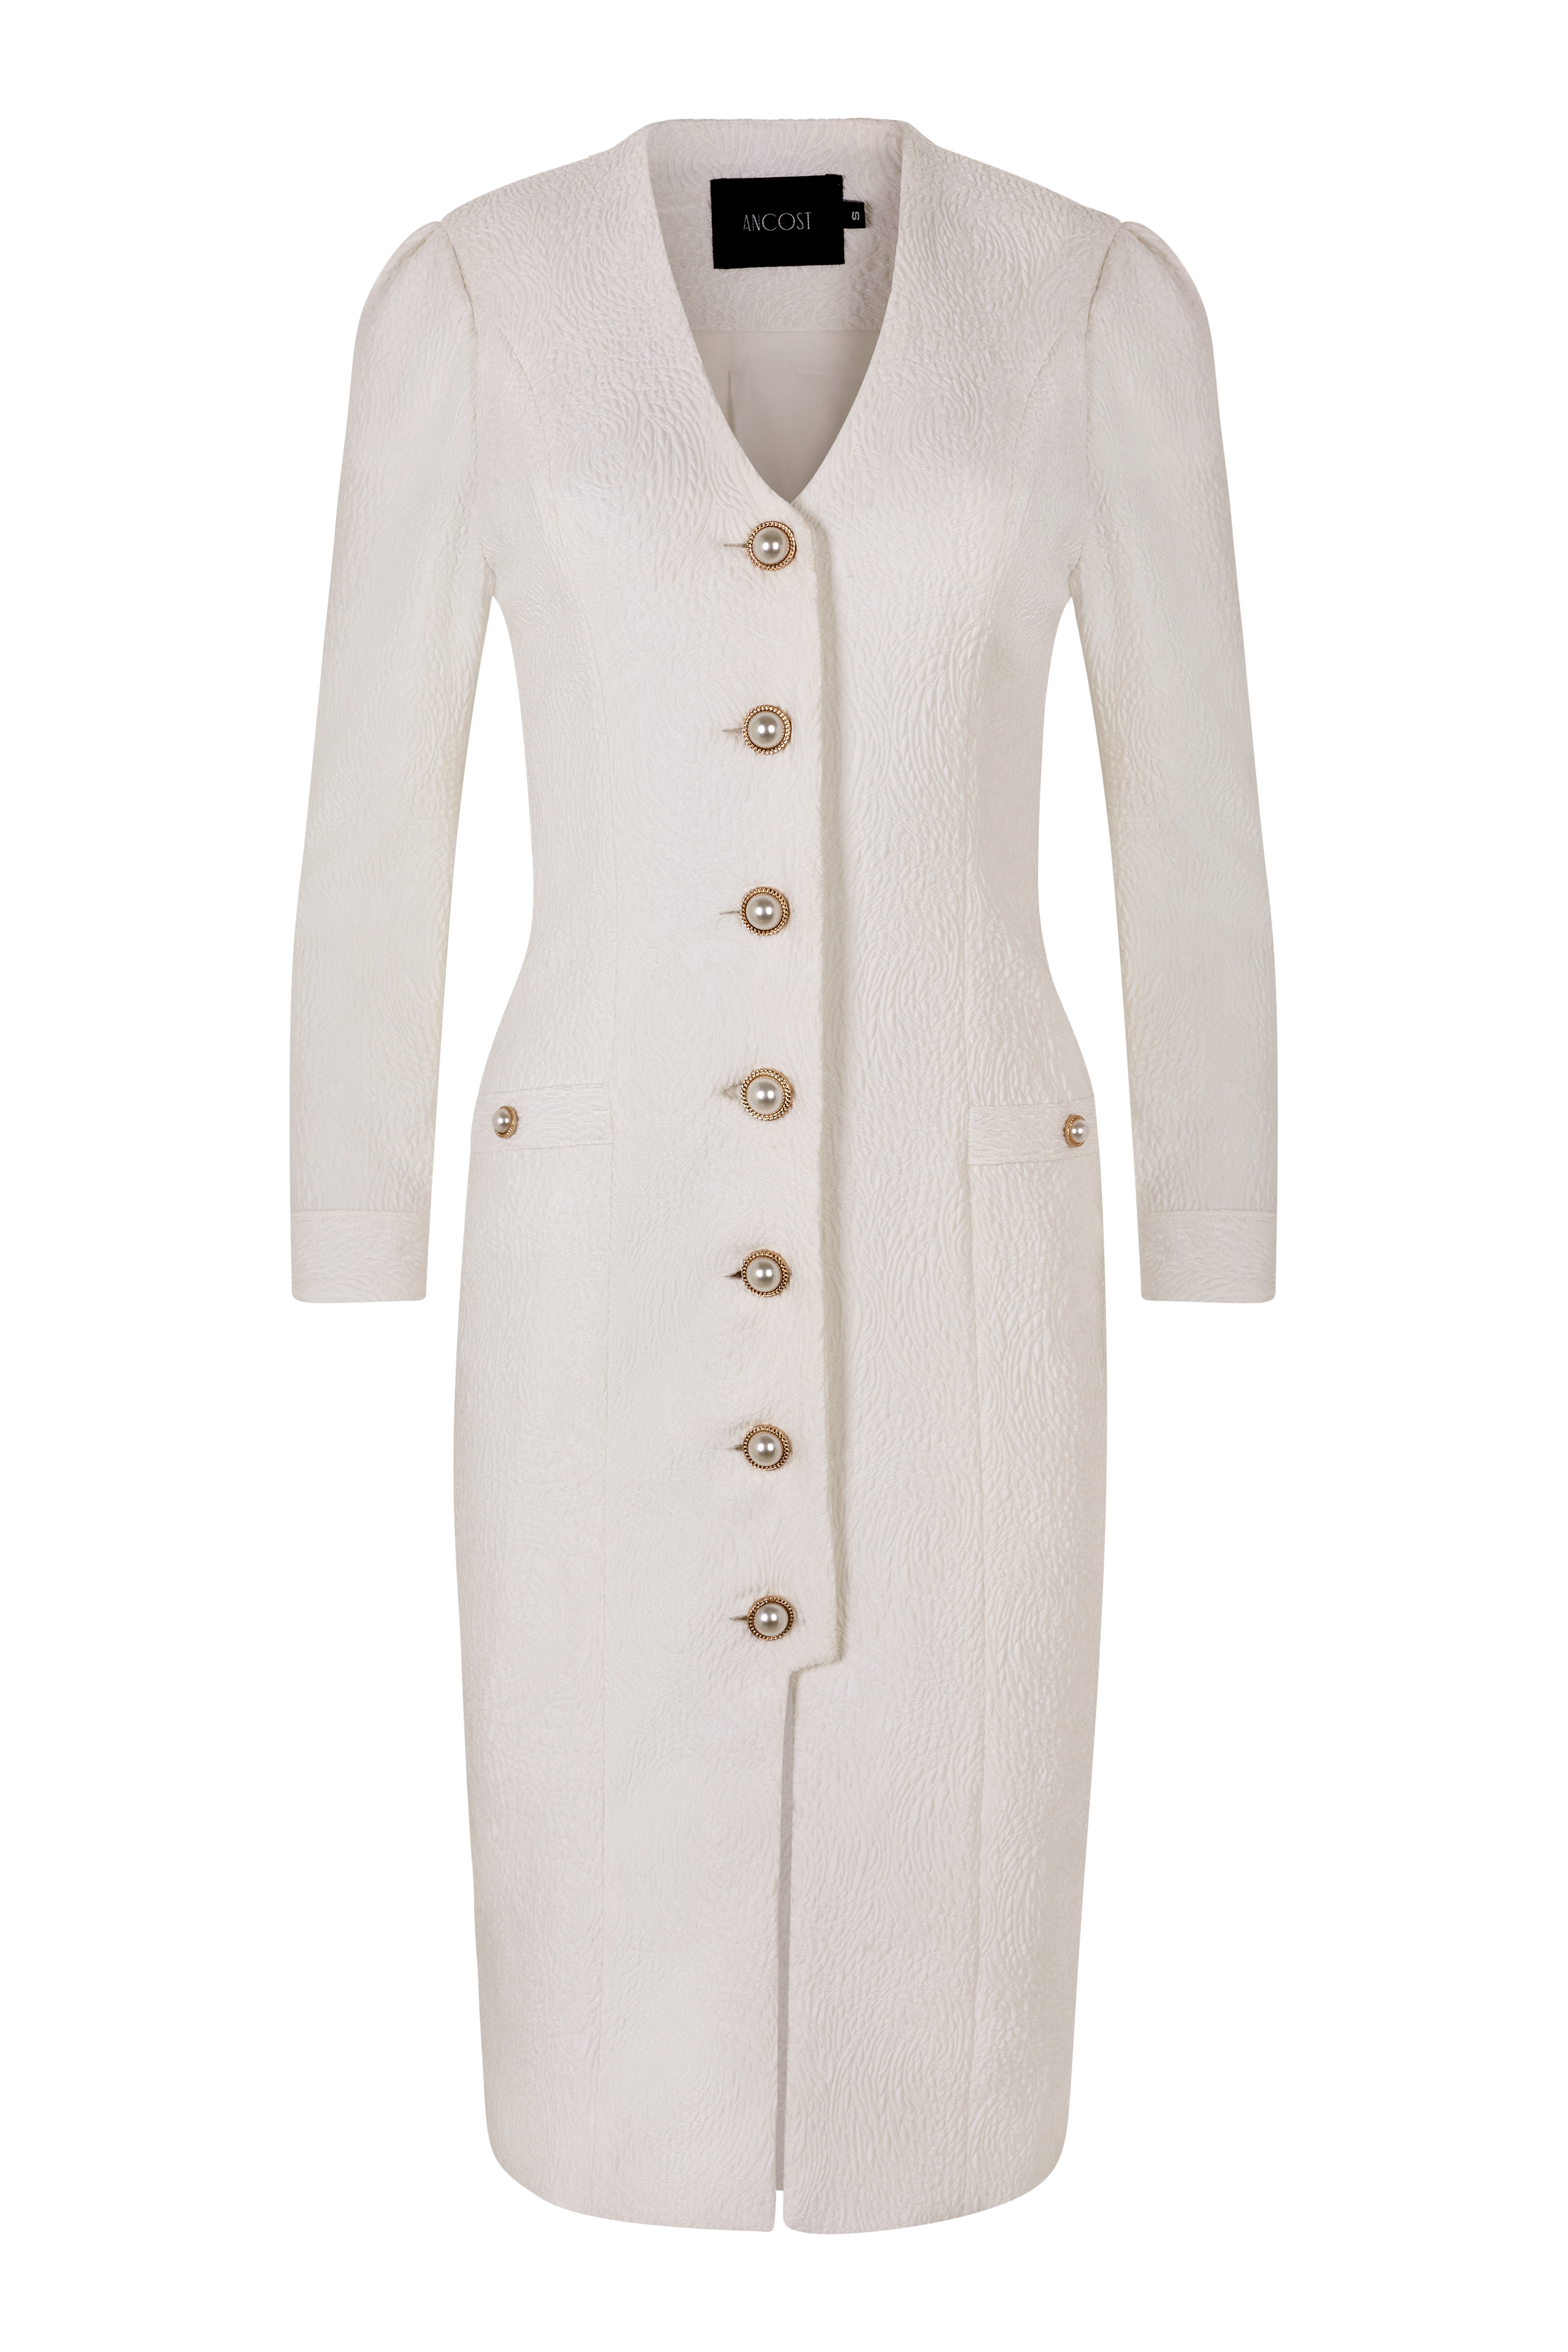 Nº01 MIDI DRESS WITH PEARL JEWEL BUTTONS | Wedding Collection